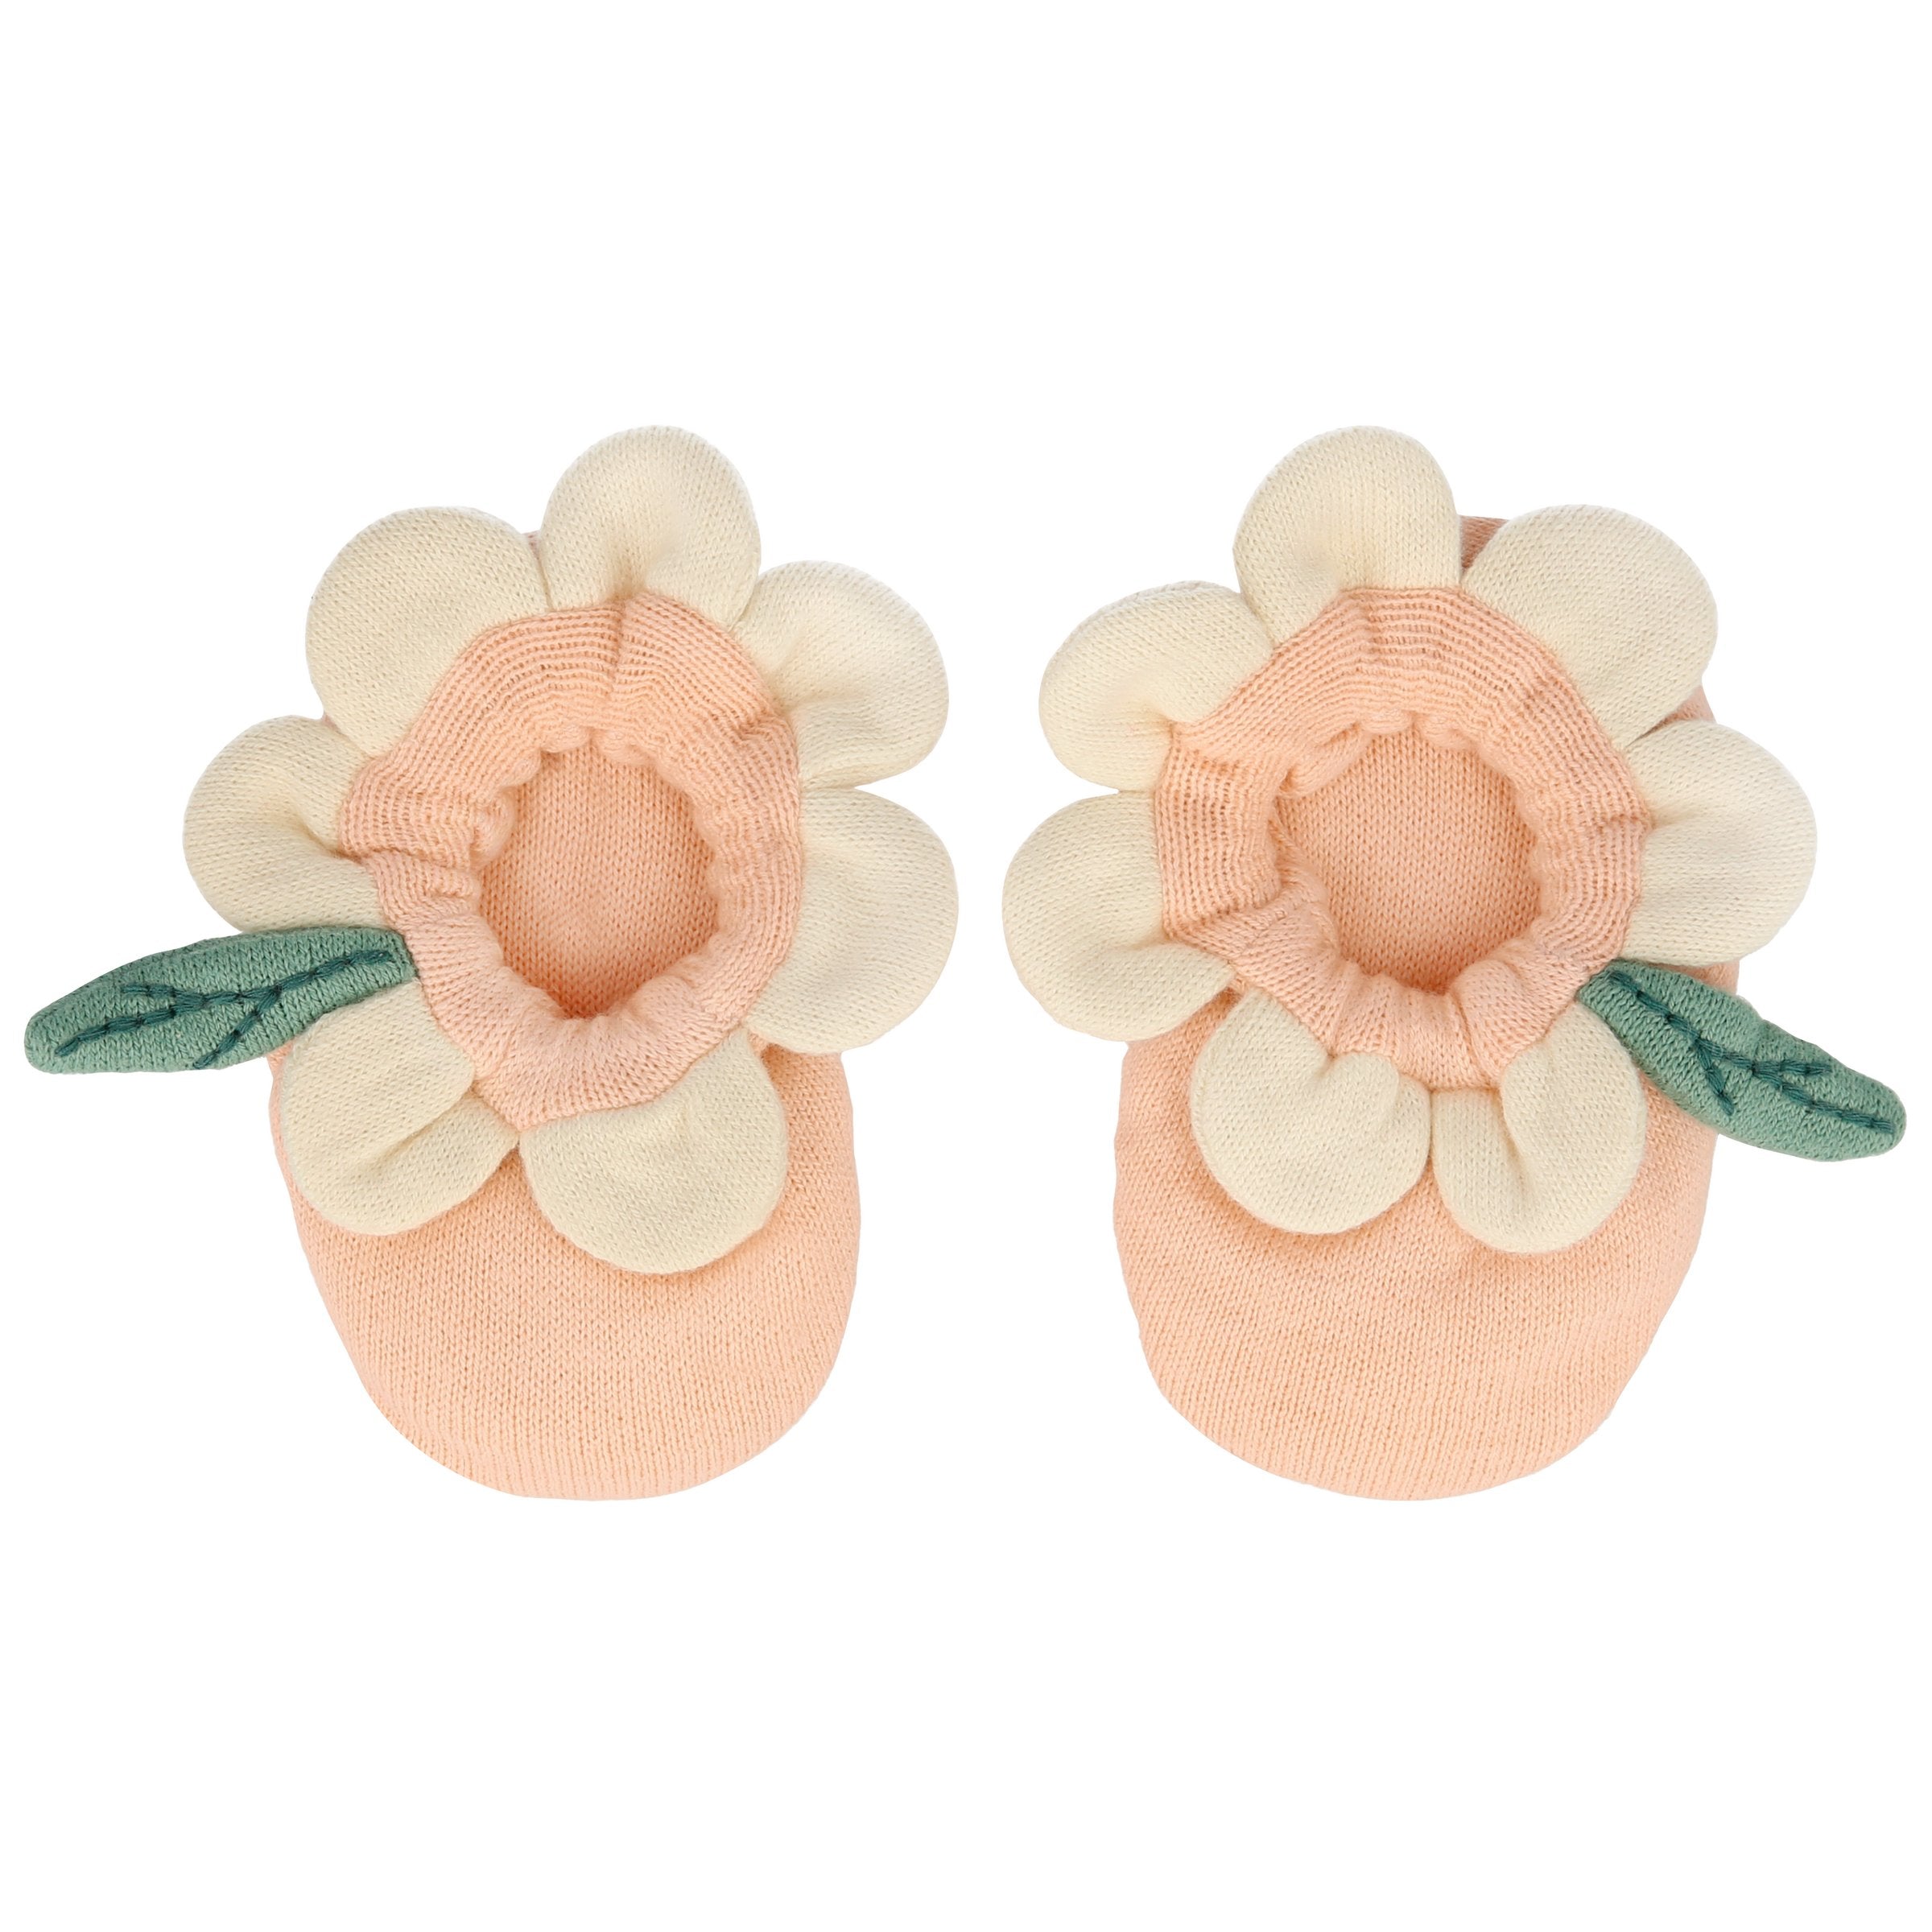 These peach daisy baby booties are crafted from knitted organic cotton, with a peach inner, and cream petal and green leaf detail.